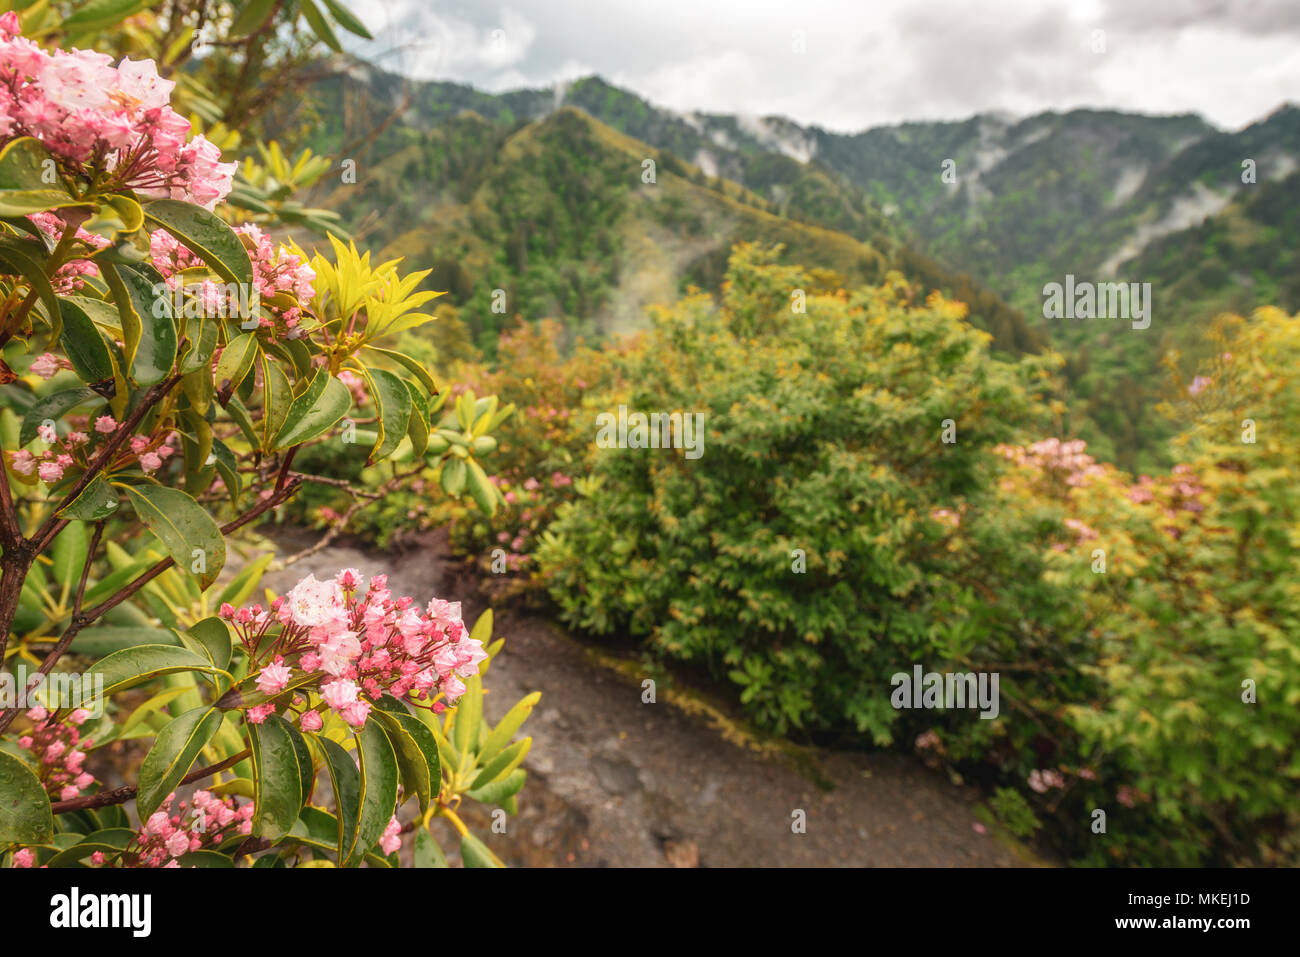 Summer landscape in the Smoky Mountains near Gatlinburg, Tennessee. Stock Photo